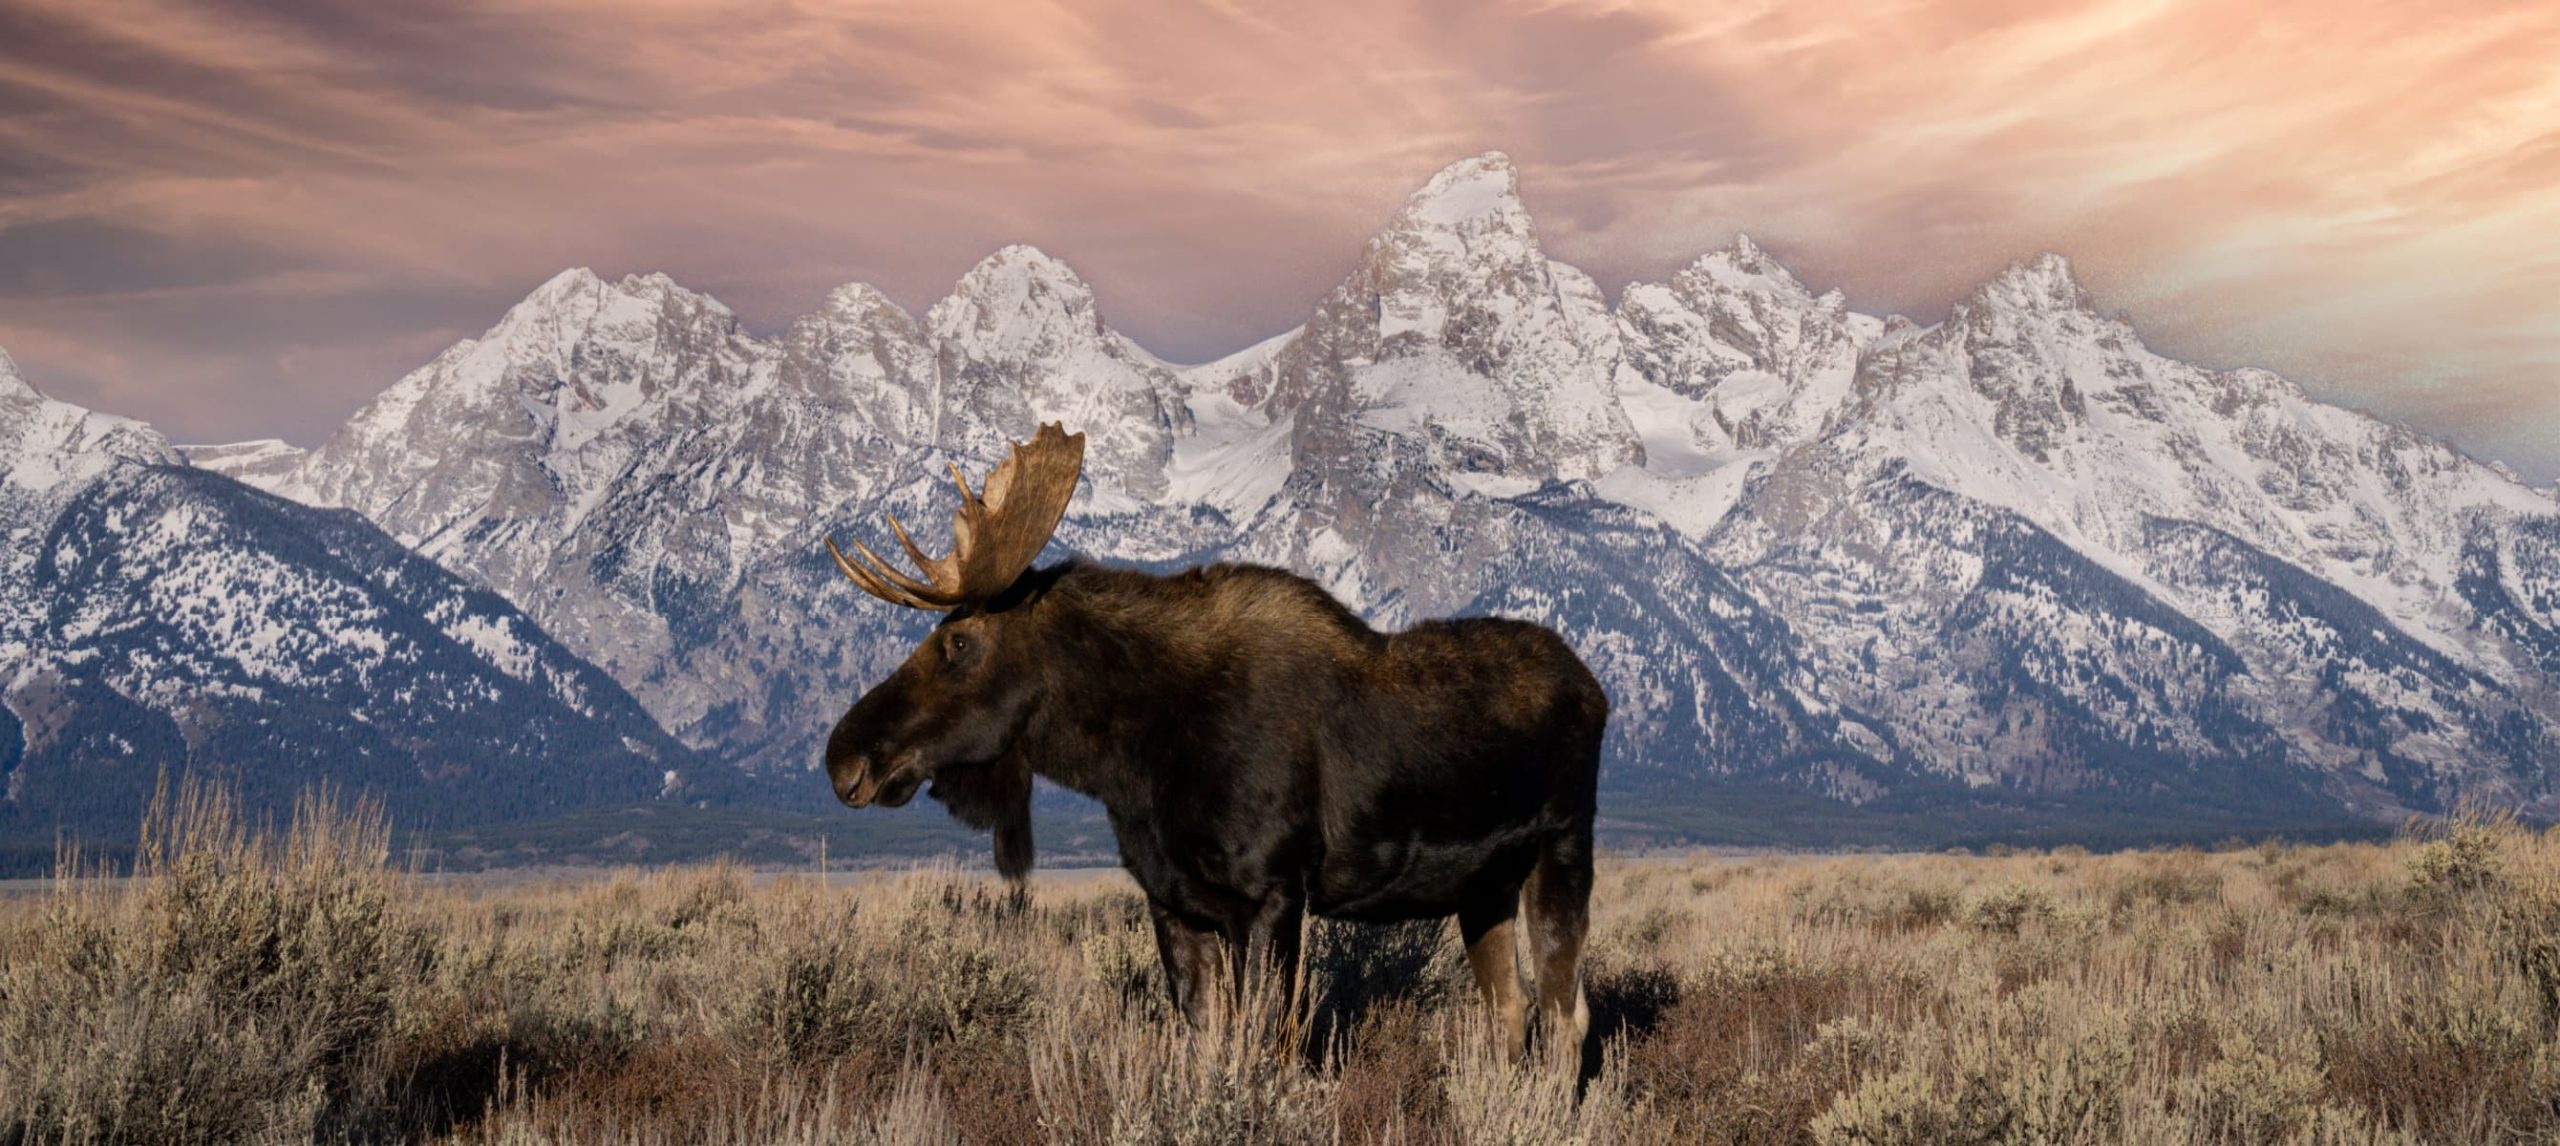 A Guide To The 4 Best National Parks In Wyoming